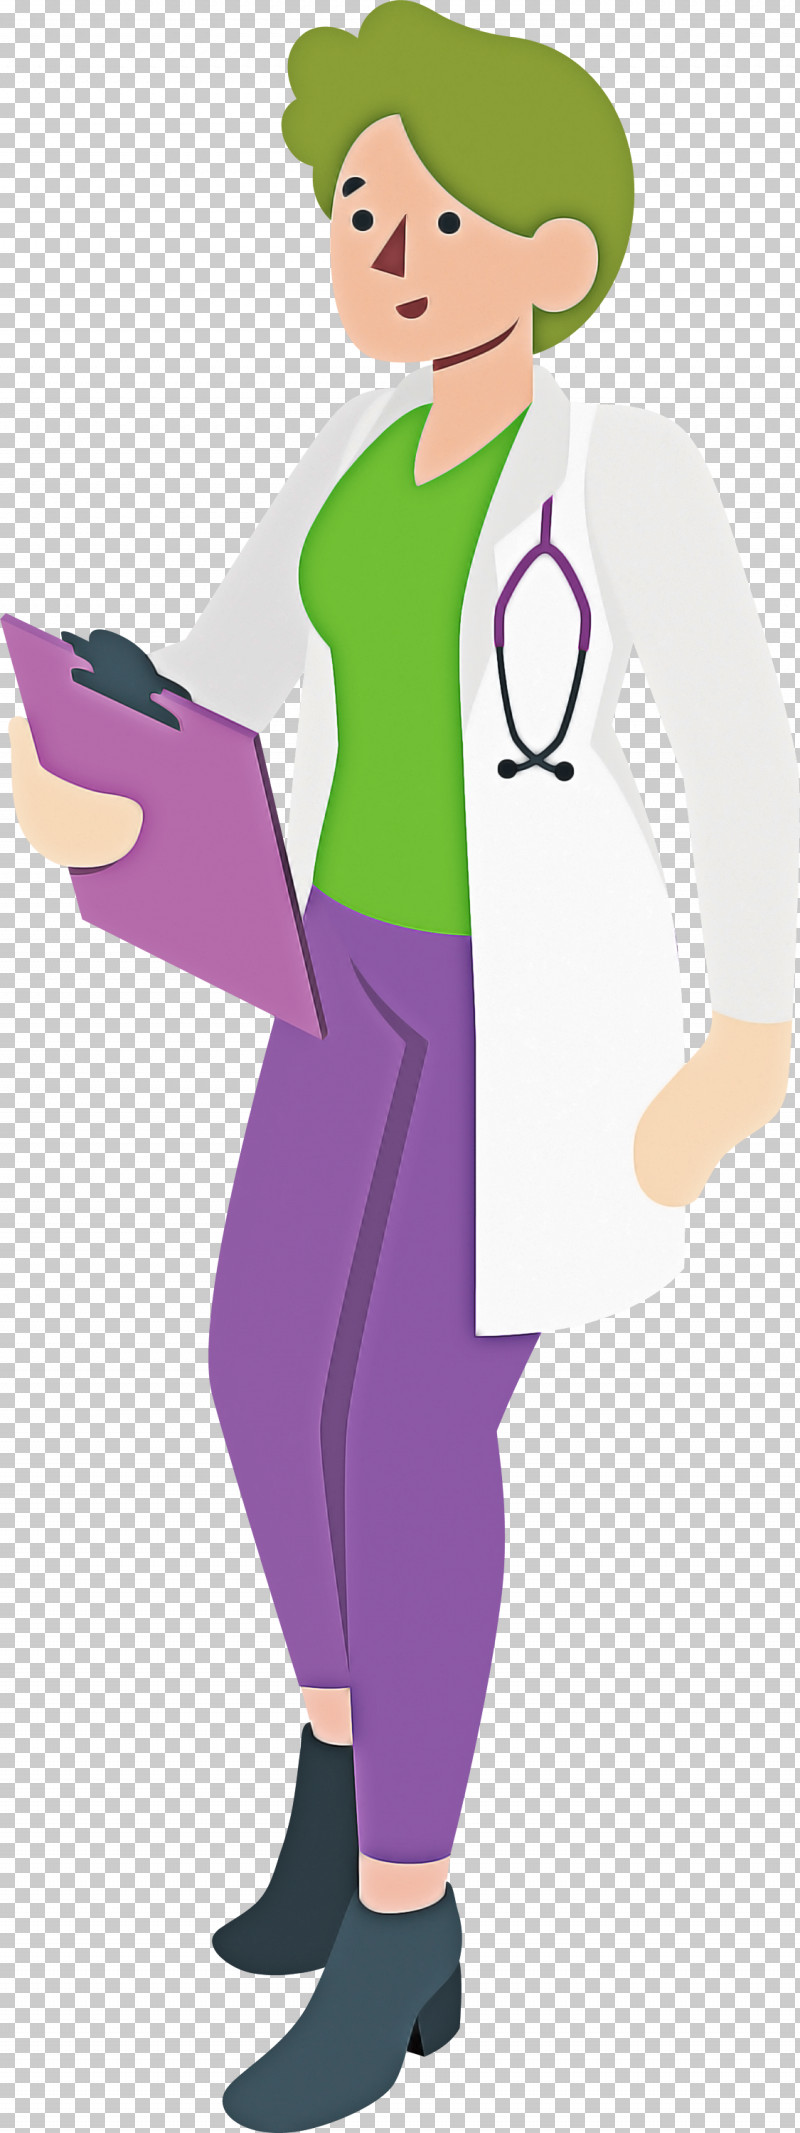 Headgear Watercolor Painting Cartoon Human Costume PNG, Clipart, Cartoon, Cartoon Doctor, Character, Clothing, Costume Free PNG Download